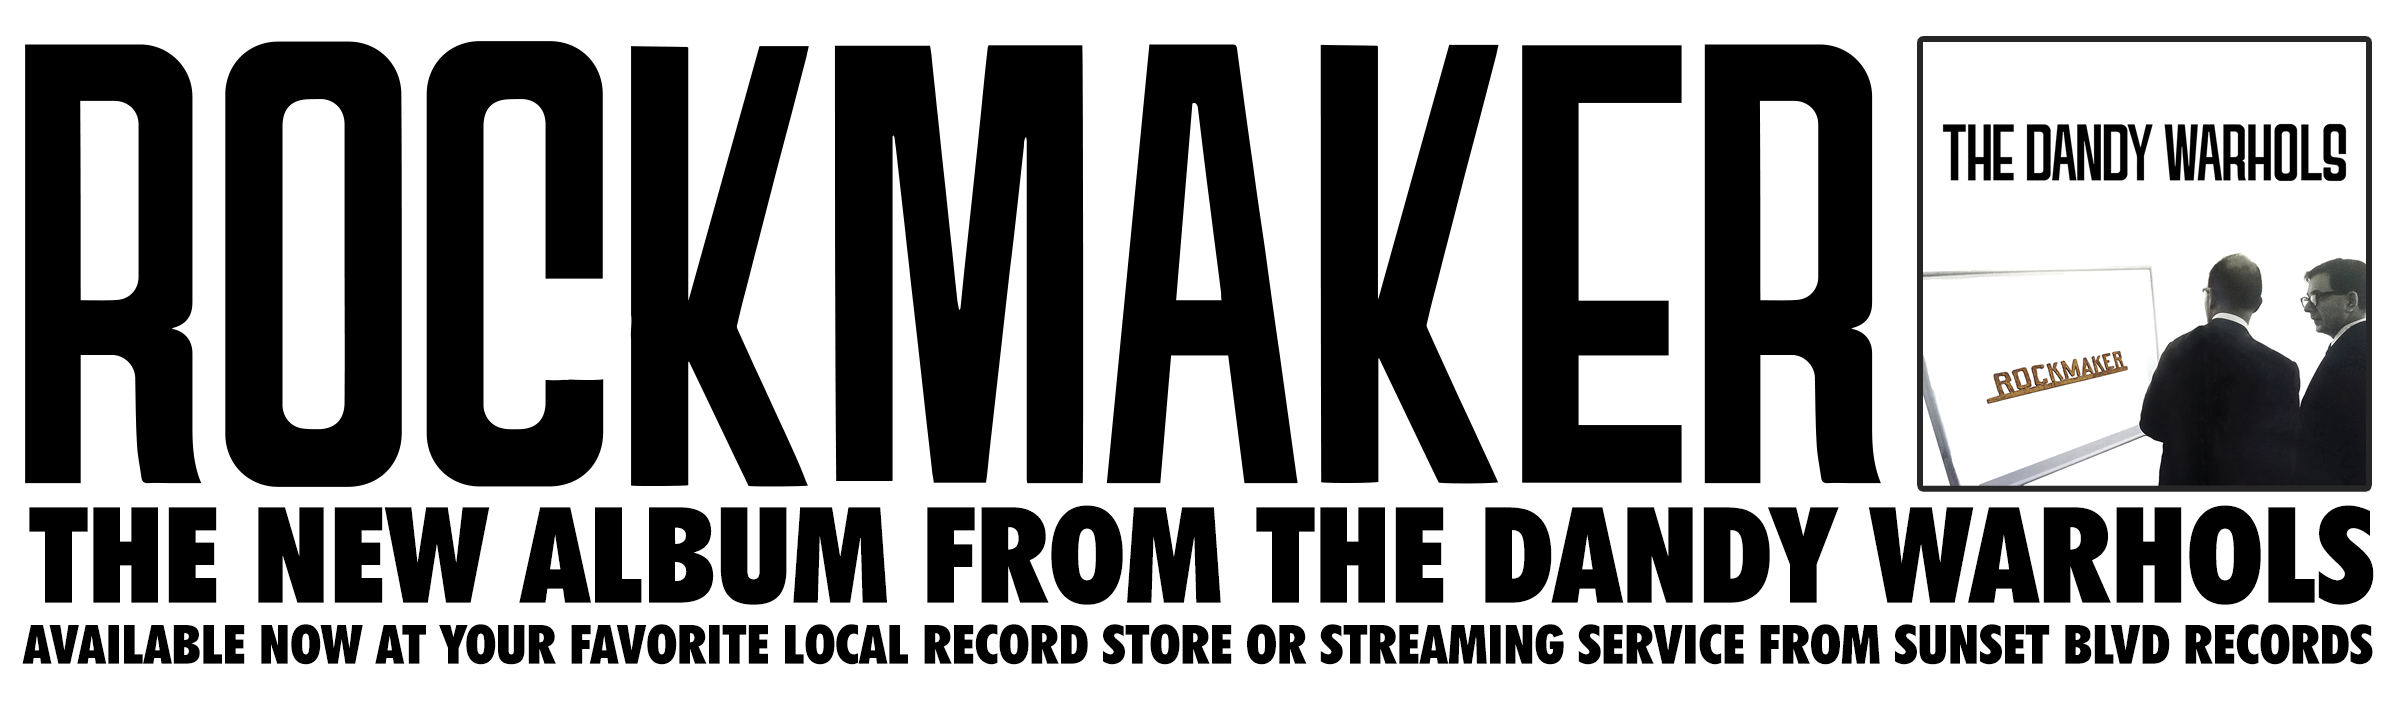 ROCKMAKER out now on LP/CD/streaming - click for more info